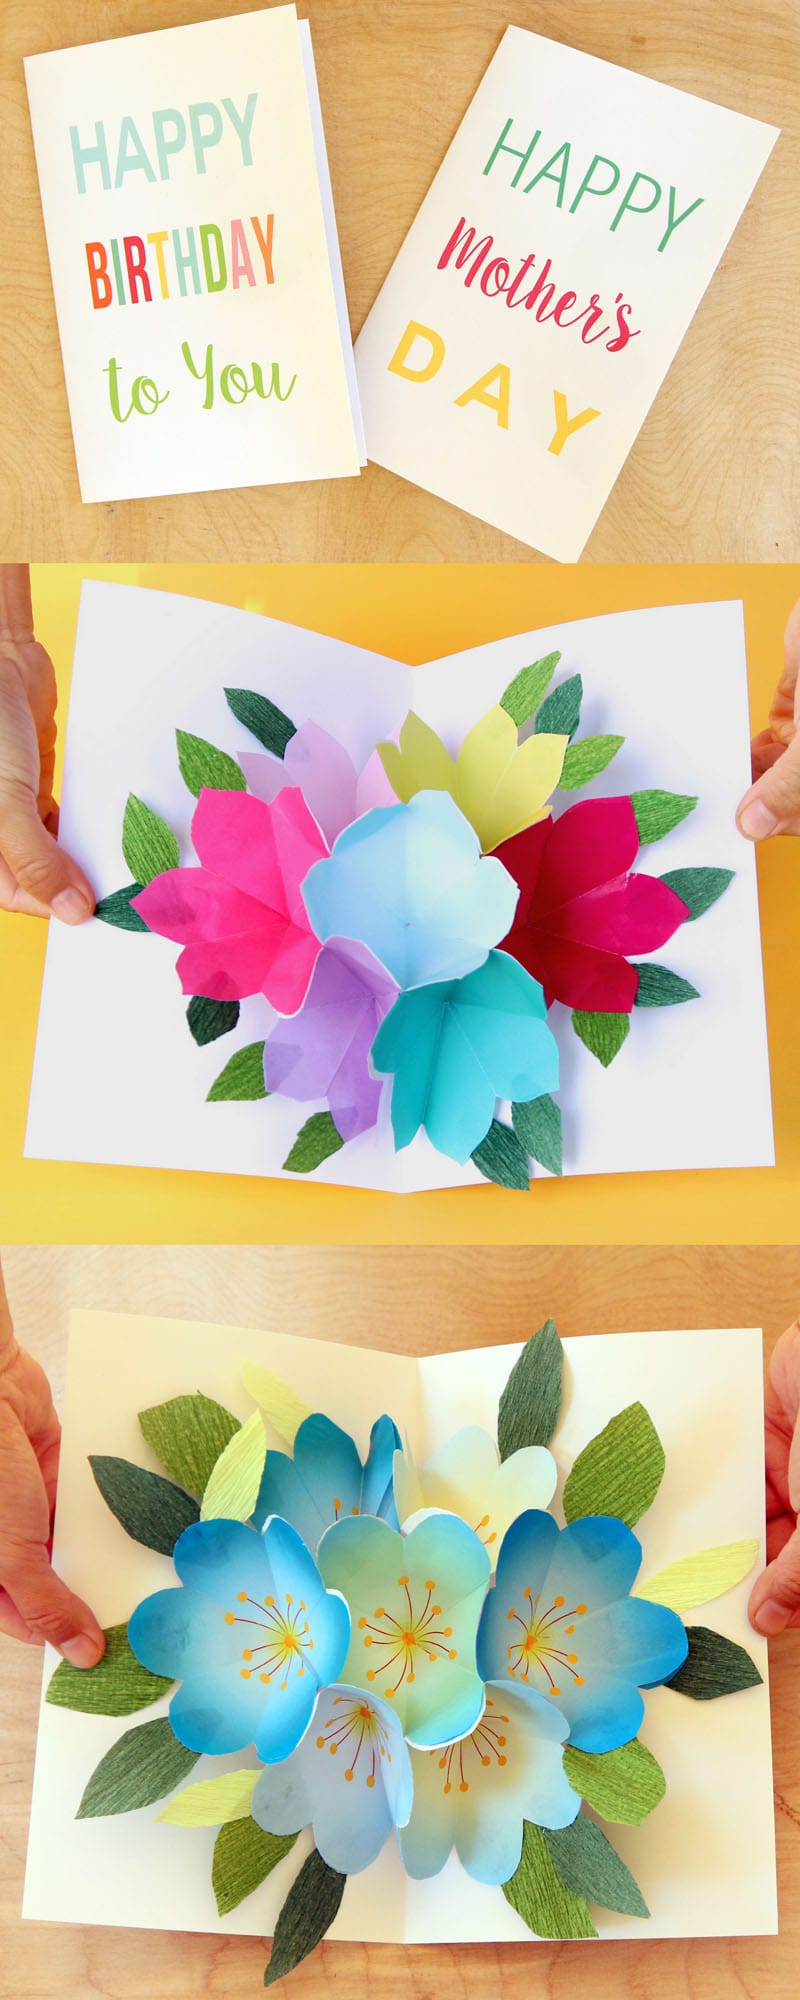 Free Printable Happy Birthday Card With Pop Up Bouquet – A With Regard To Happy Birthday Pop Up Card Free Template